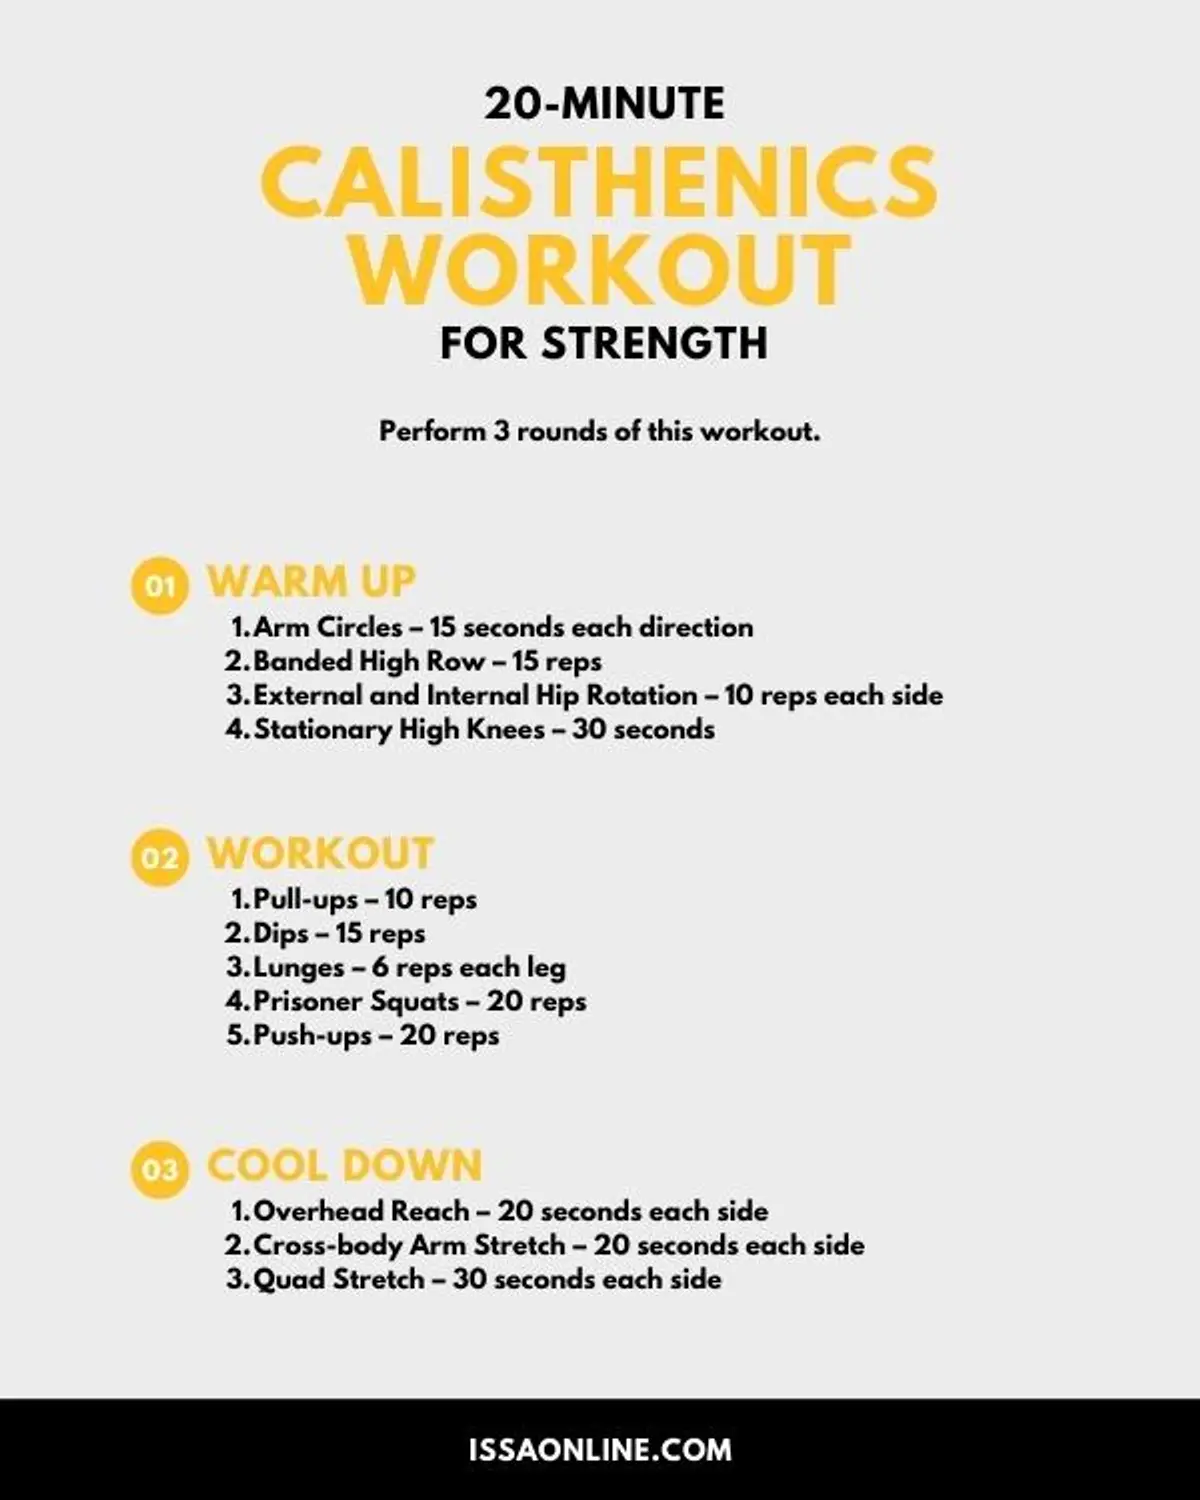 ISSA, International Sports Sciences Association, Certified Personal Trainer, ISSAonline, 20-Minute Calisthenics Workout for Strength, Calisthenics Workout Handout